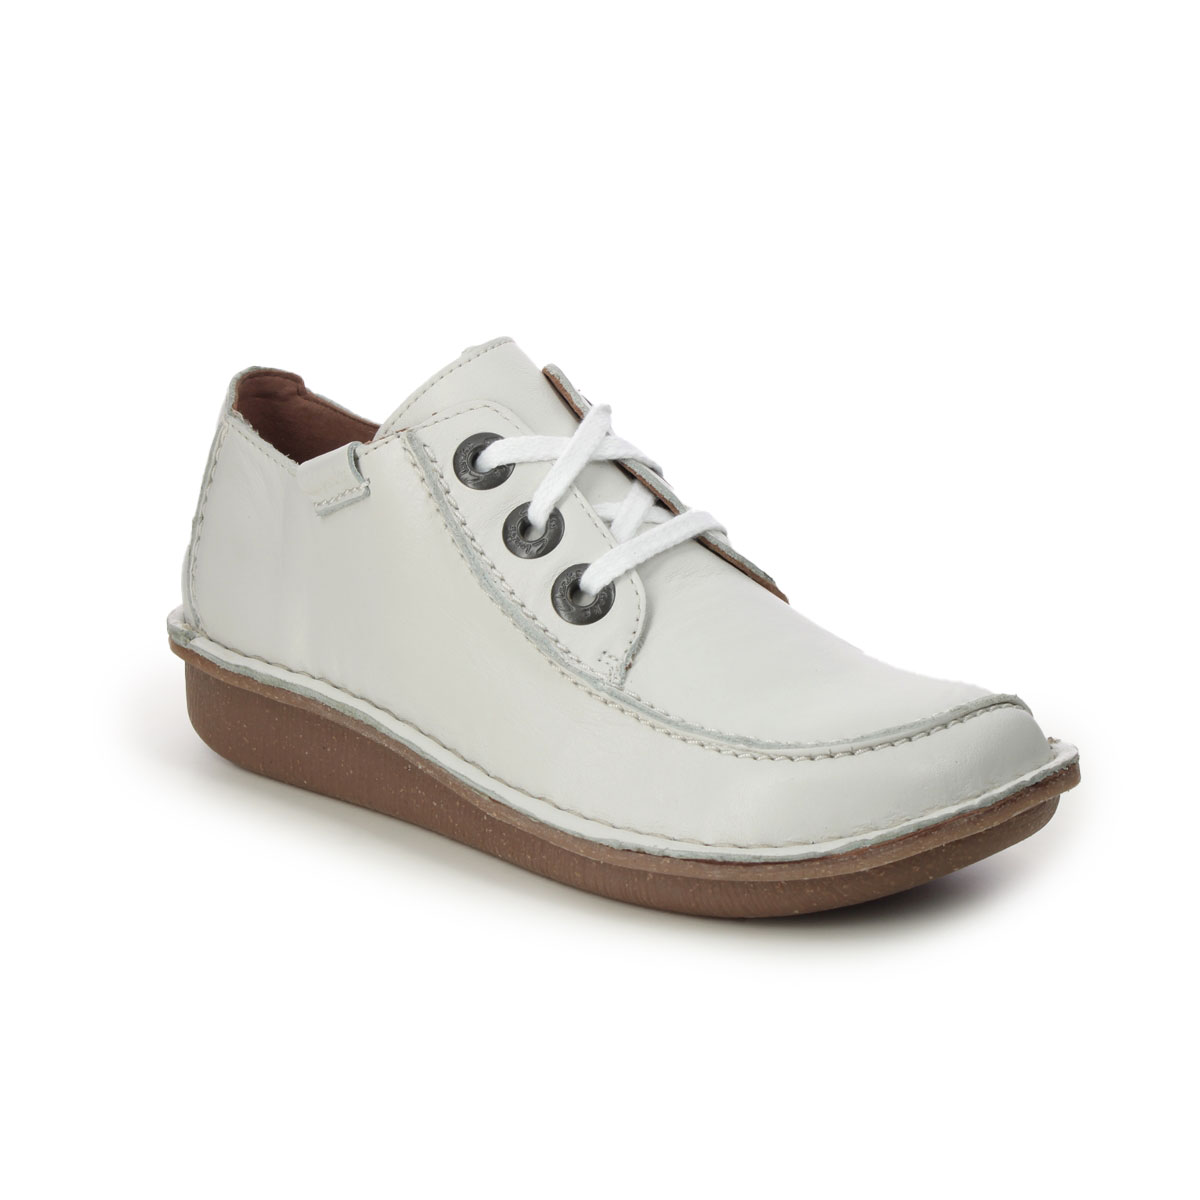 Clarks Funny Dream White Leather Womens lacing shoes 6544-44D in a Plain Leather in Size 4